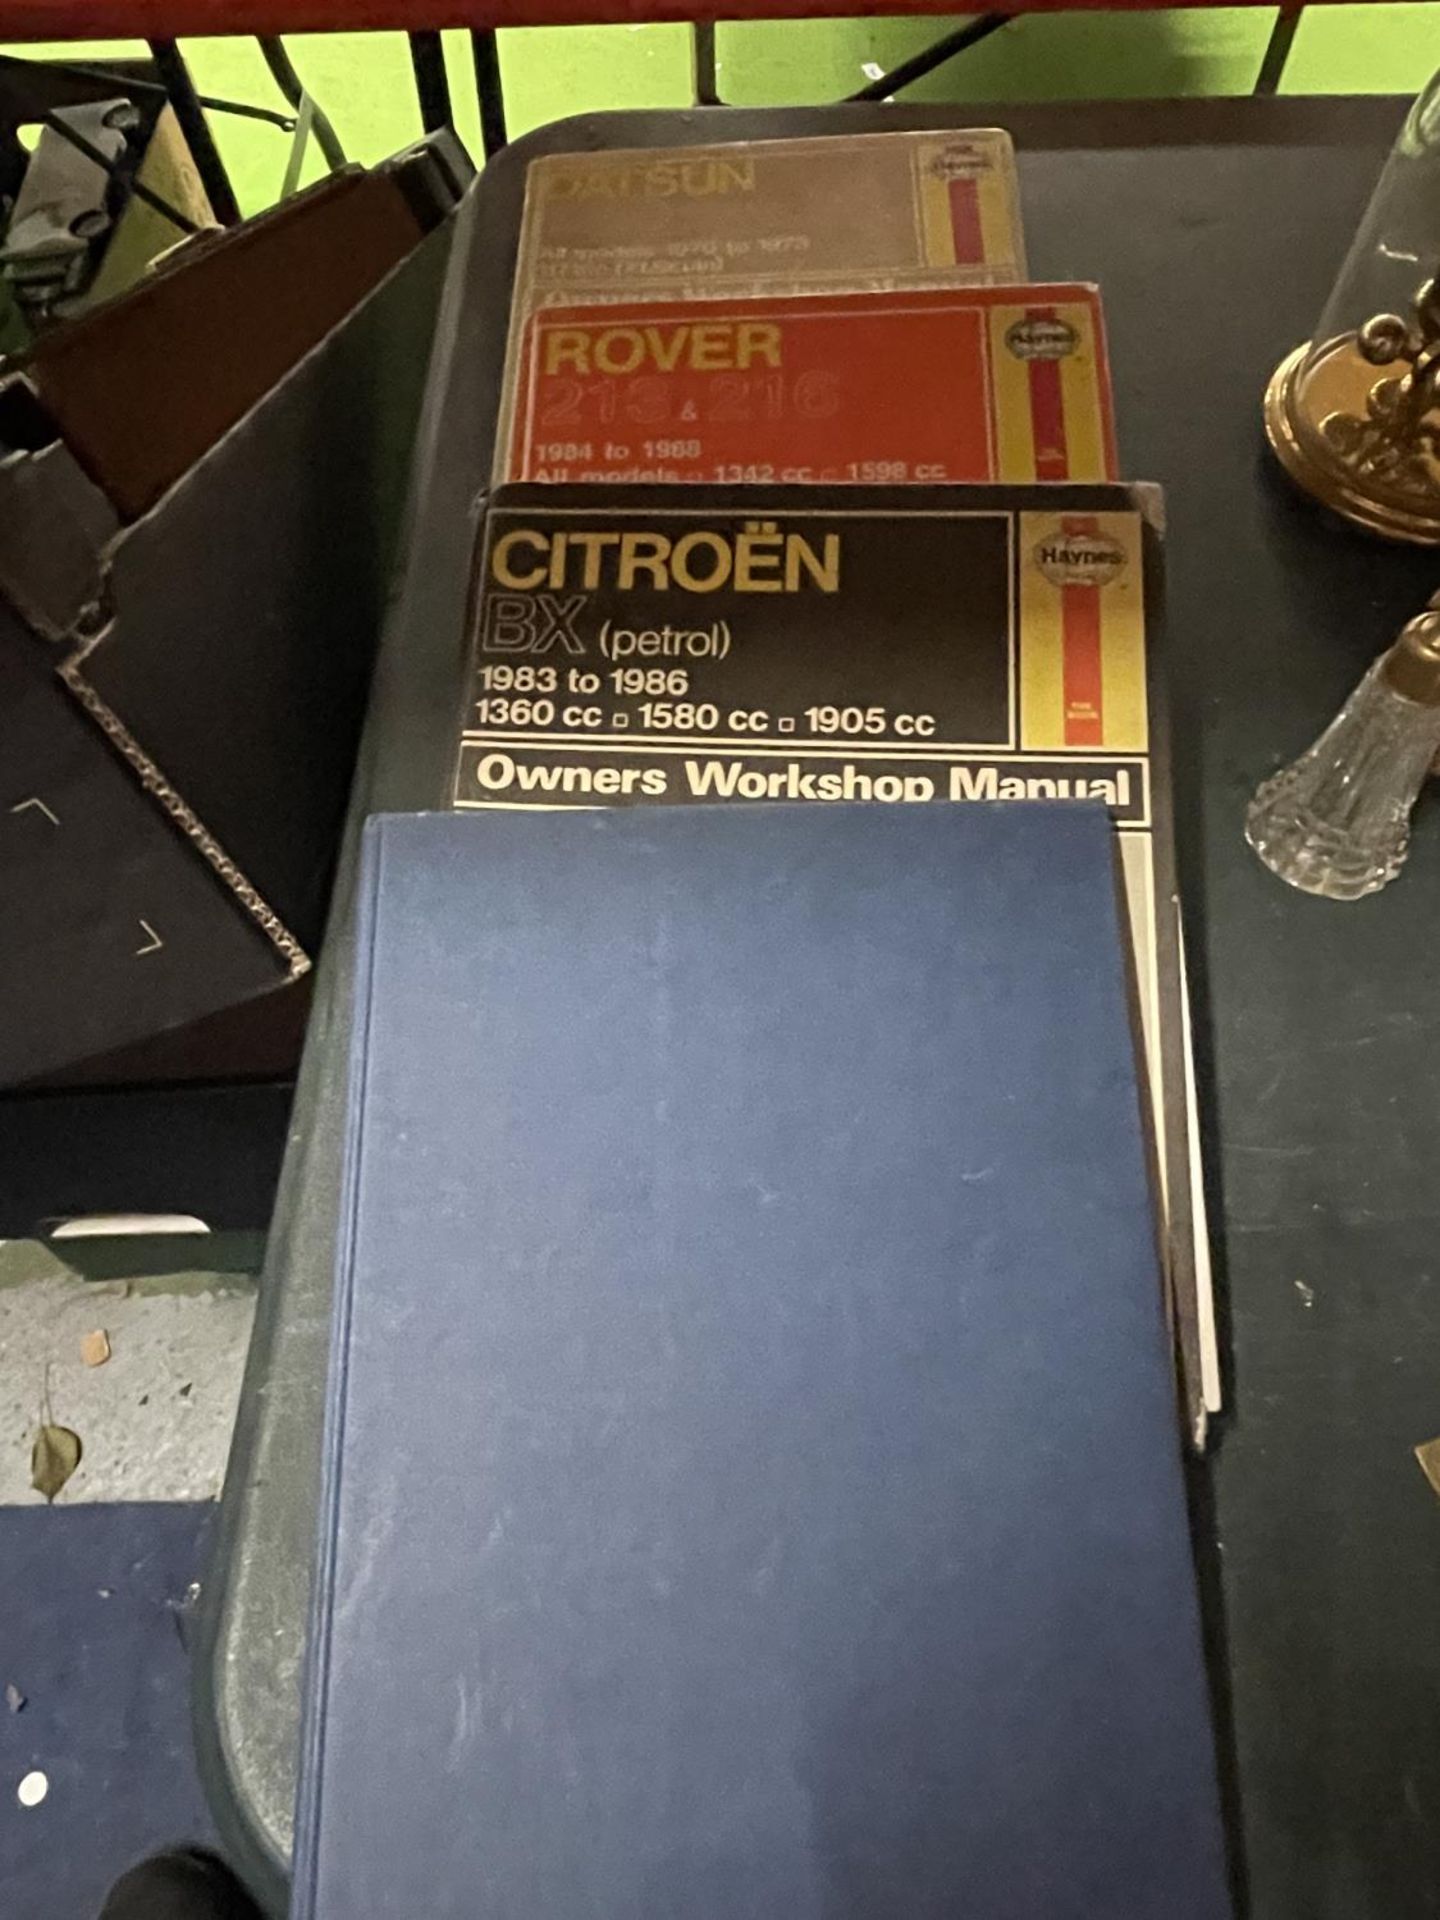 THREE HAYNES HARDBACK CAR MANUALS FOR CITROEN BX, ROVER 213 AND 216 AND DATSUN 1200 PLUS A '